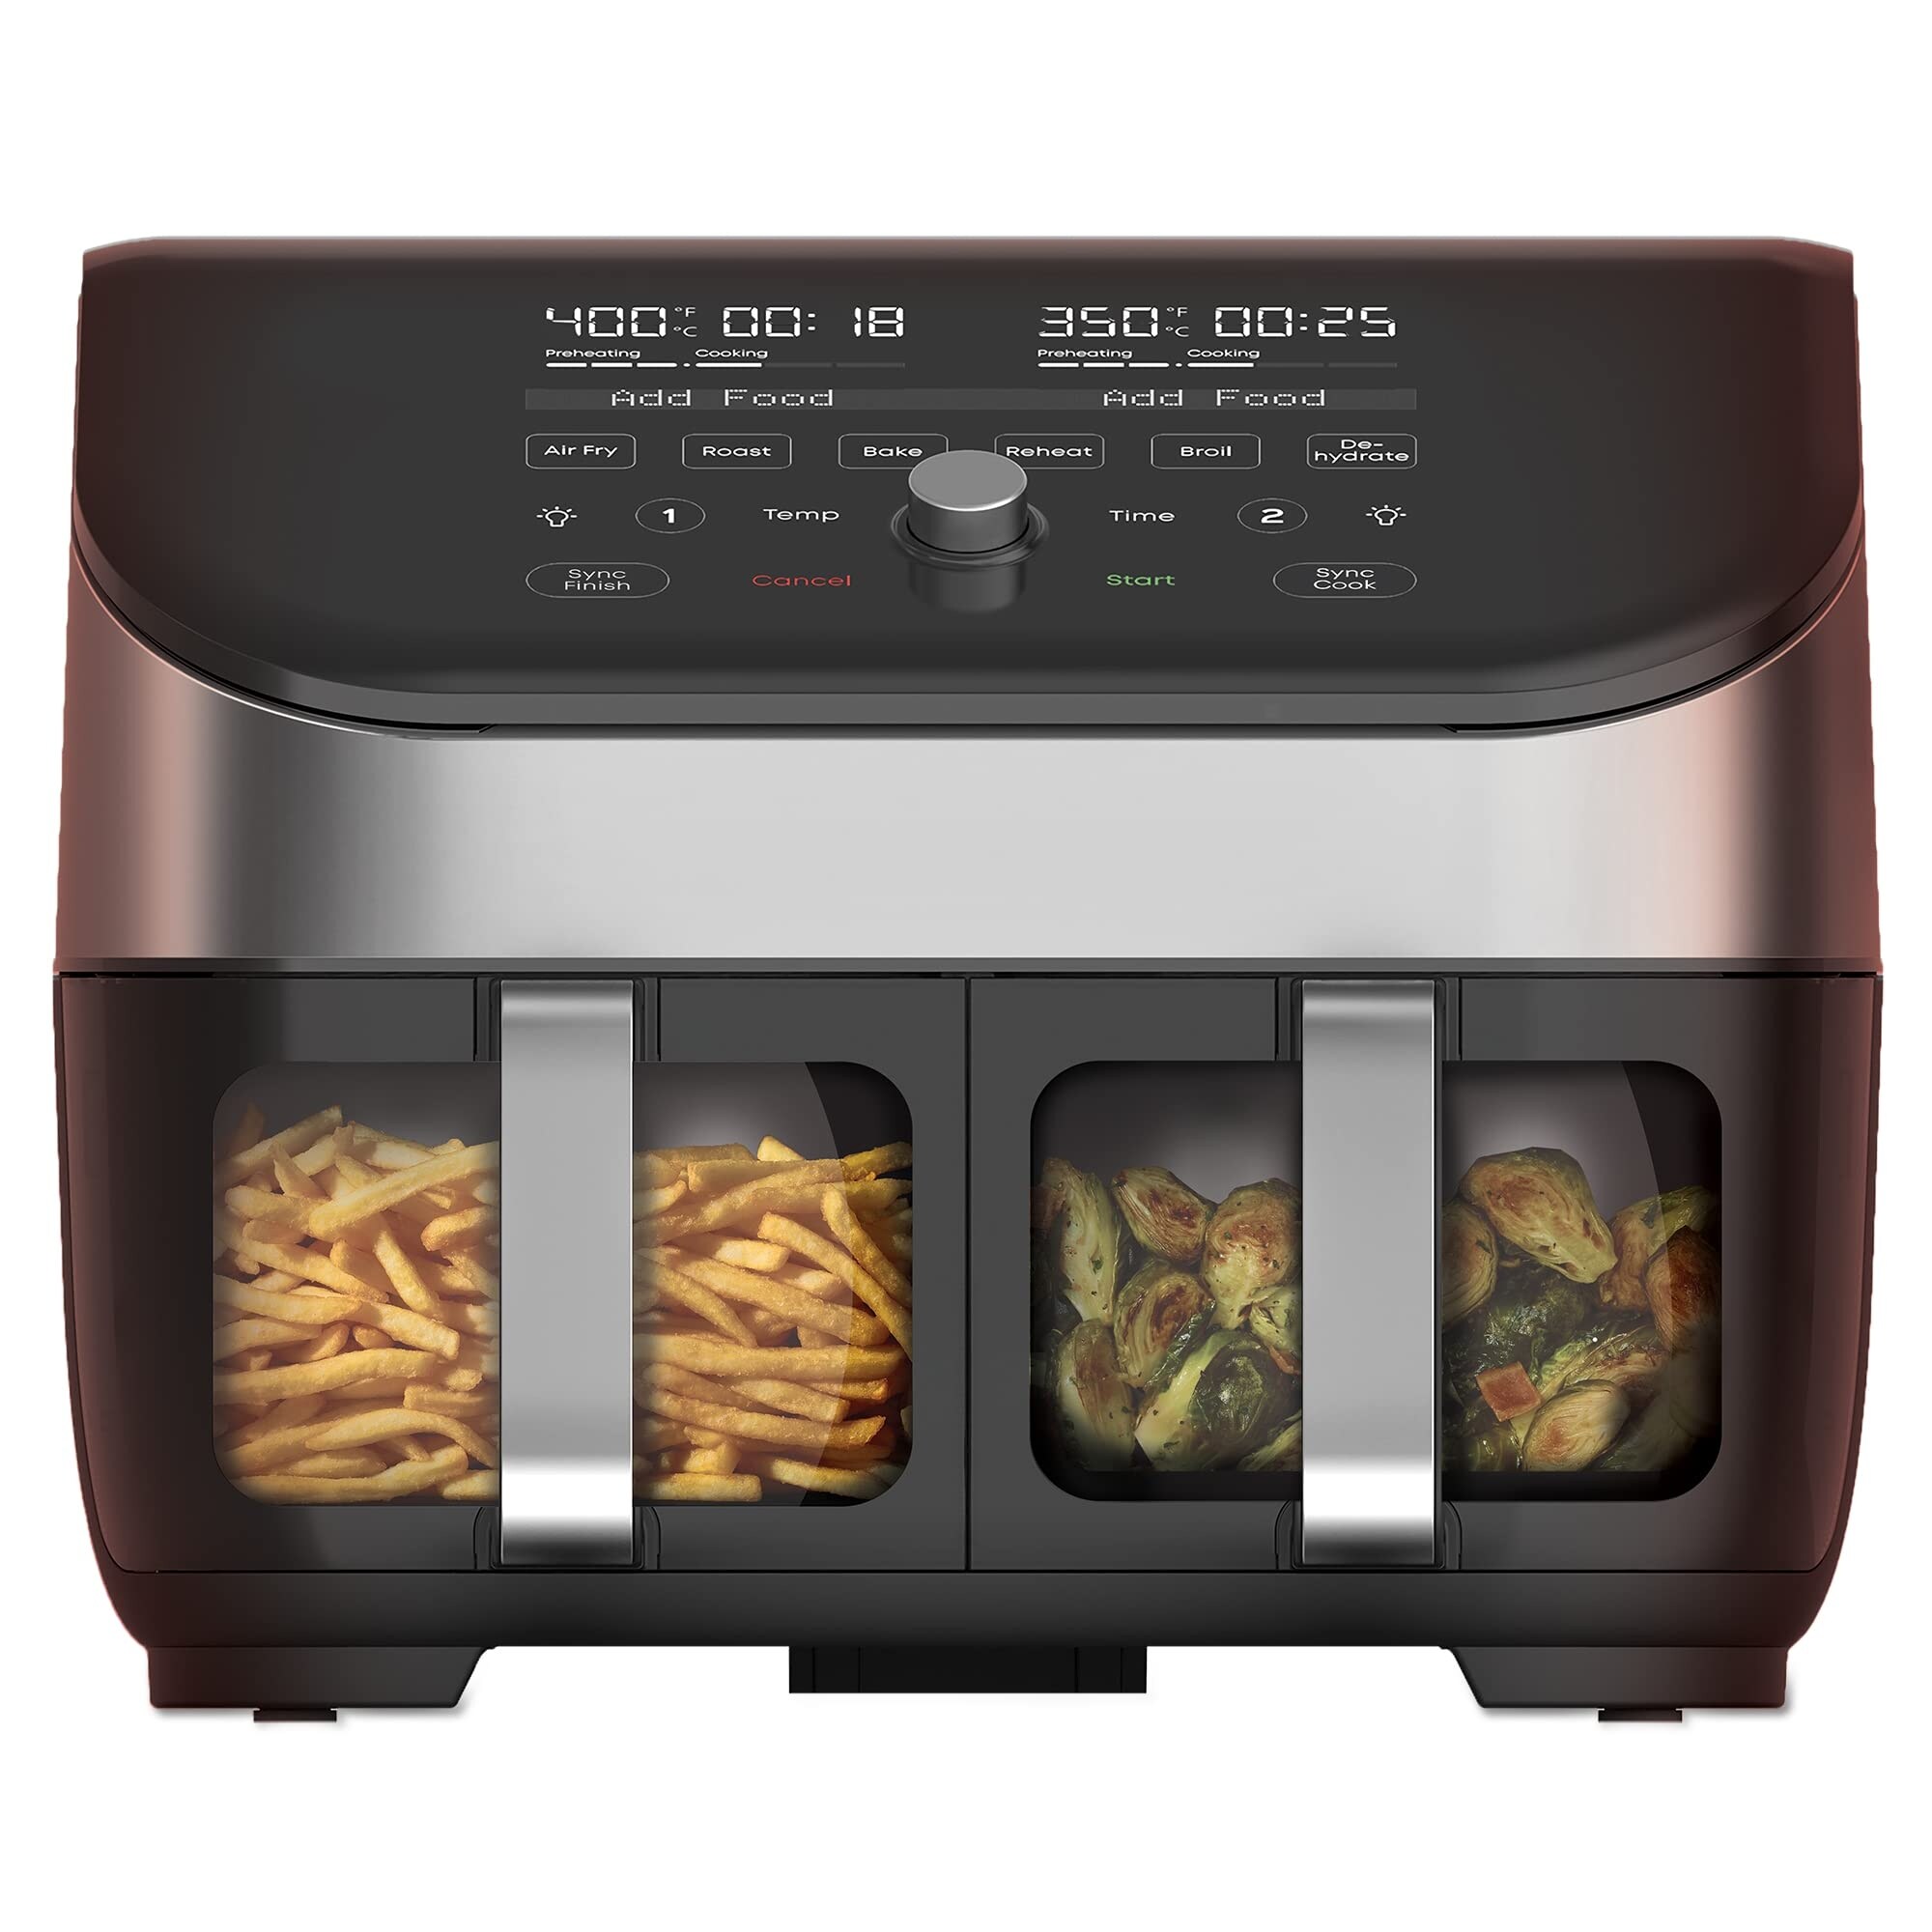 https://ak1.ostkcdn.com/images/products/is/images/direct/e57293dd1dbfe6bc1aae9471b428eaf7f6fd2d0f/XL-8-QT-Dual-Basket-Air-Fryer-Oven%2C-2-Independent-Baskets%2CClear-Cooking-Window%2C-App-with-over-100-Recipes%2CStainless-Steel.jpg